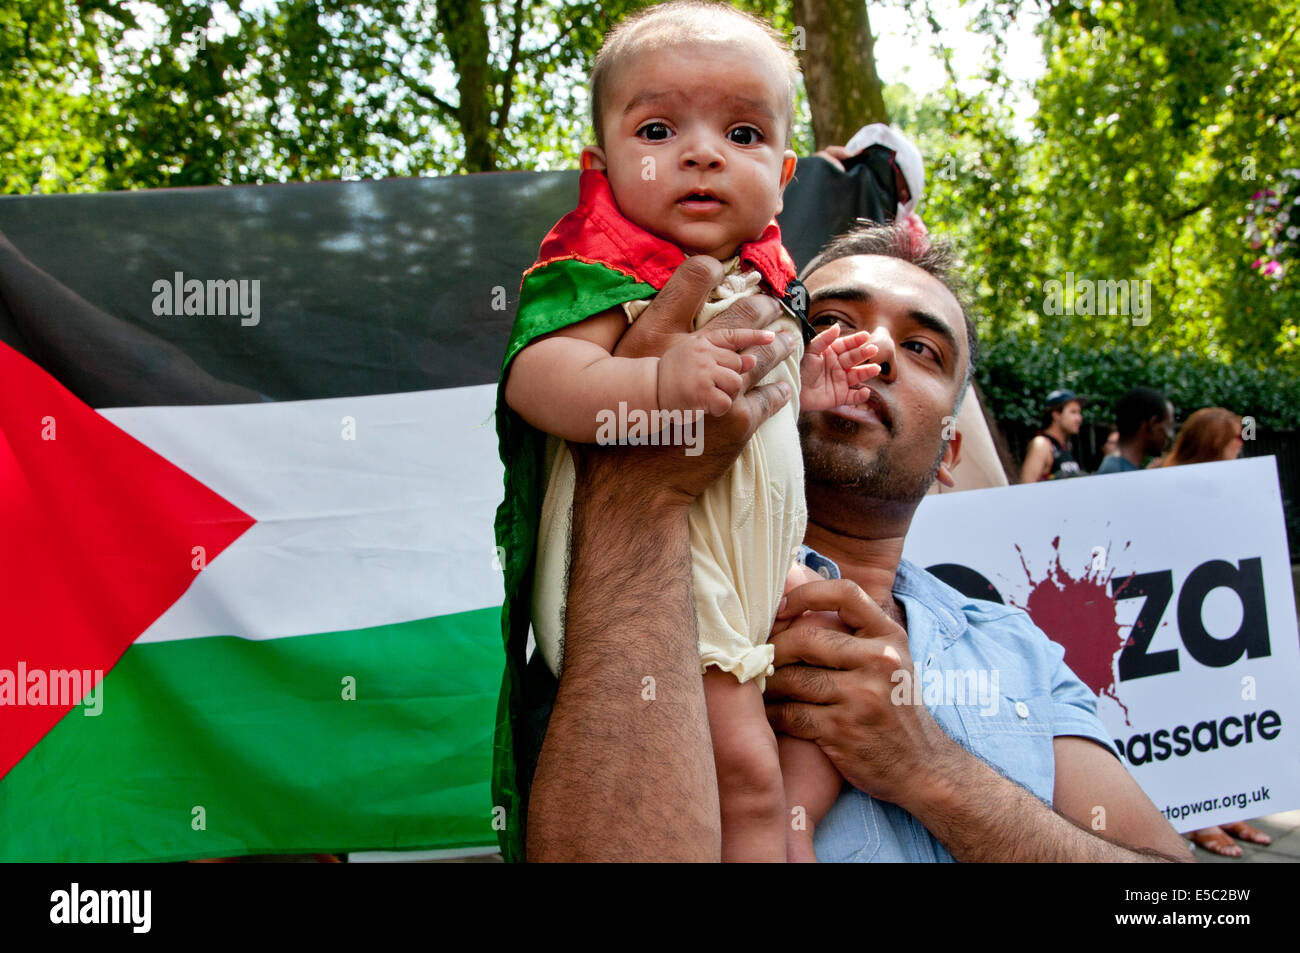 Demonstration against Israeli bombing of Gaza, 26.07.2014. A young baby wrapped in a Palestinian flag is held up by her father. Stock Photo